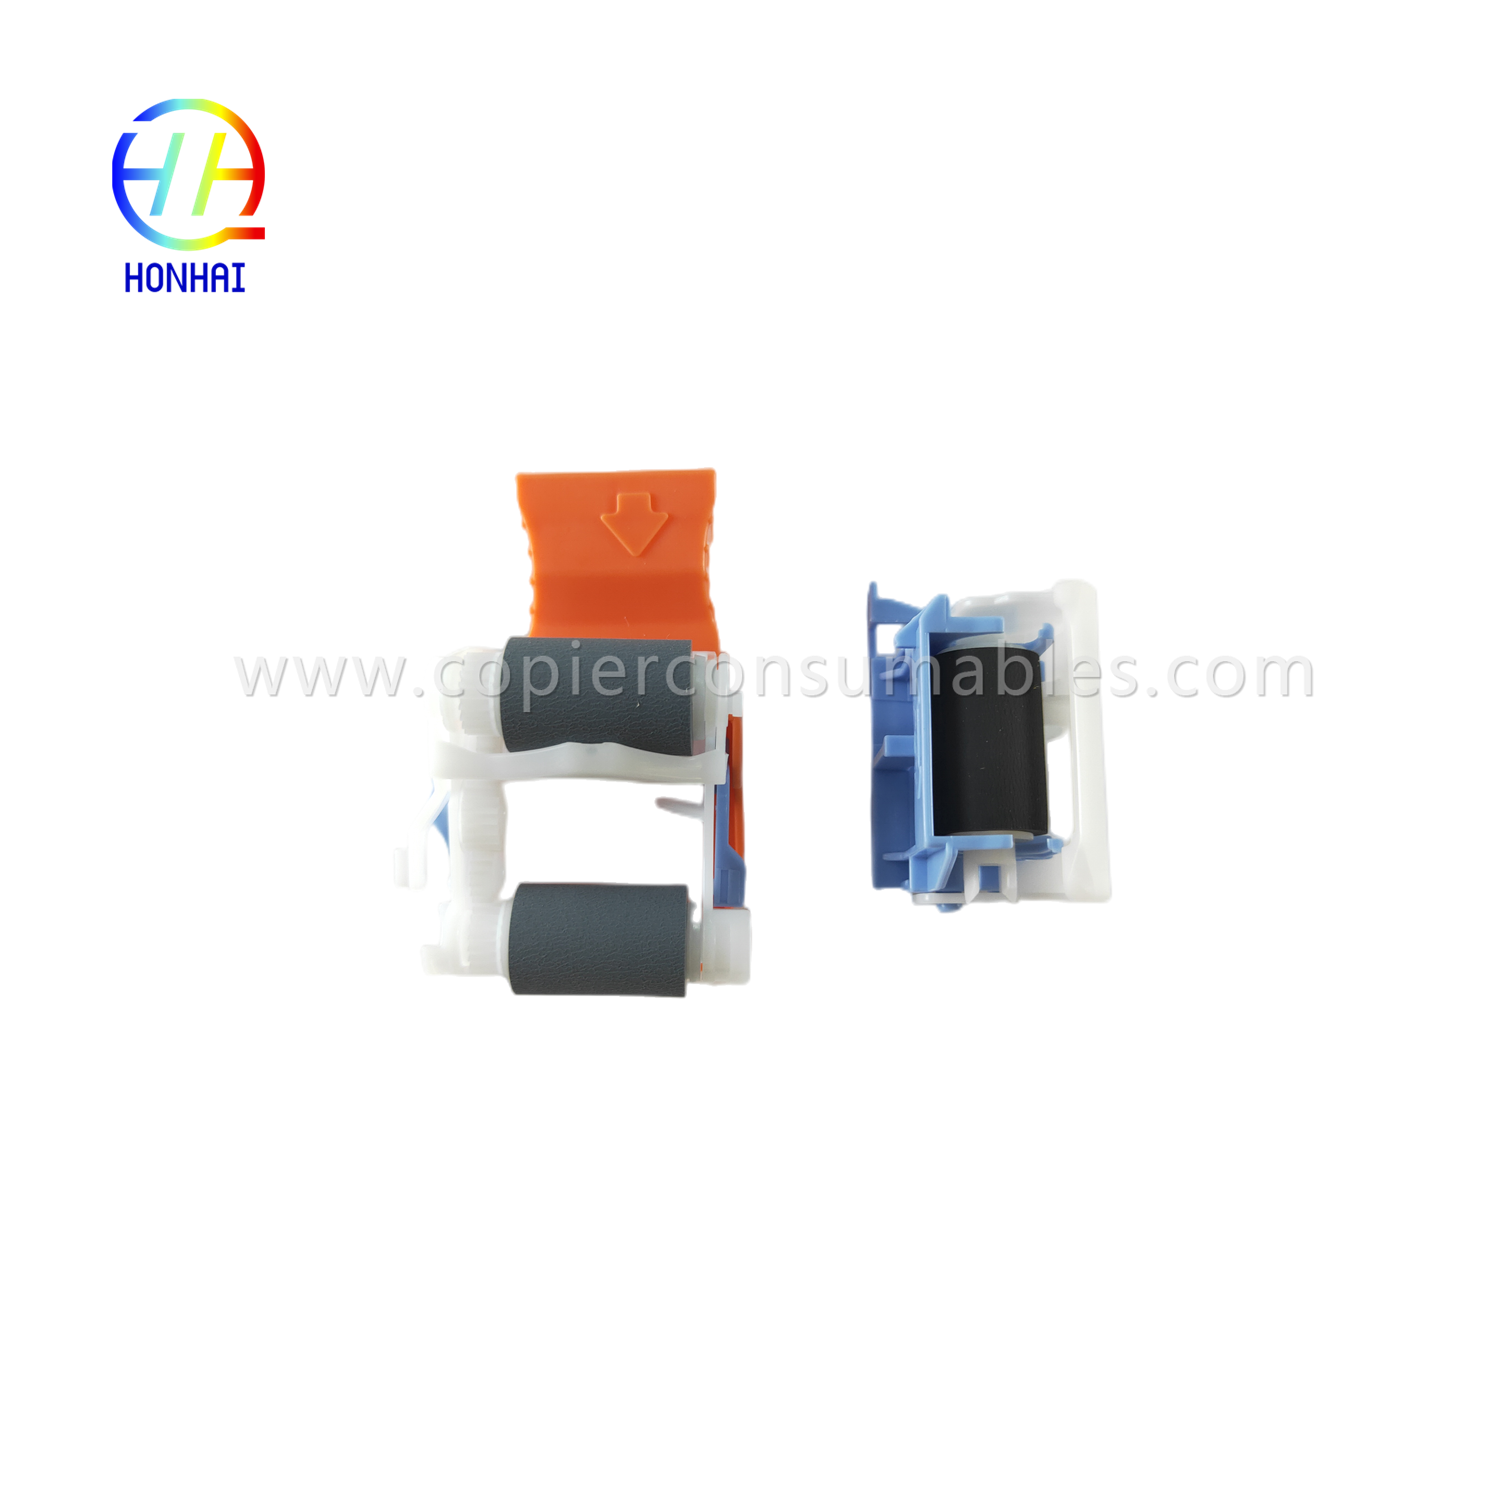 https://www.copierconsumables.com/separation-pickup-feed-assemblies-for-hp-j8j70-67904-m607-m608-m609-product/